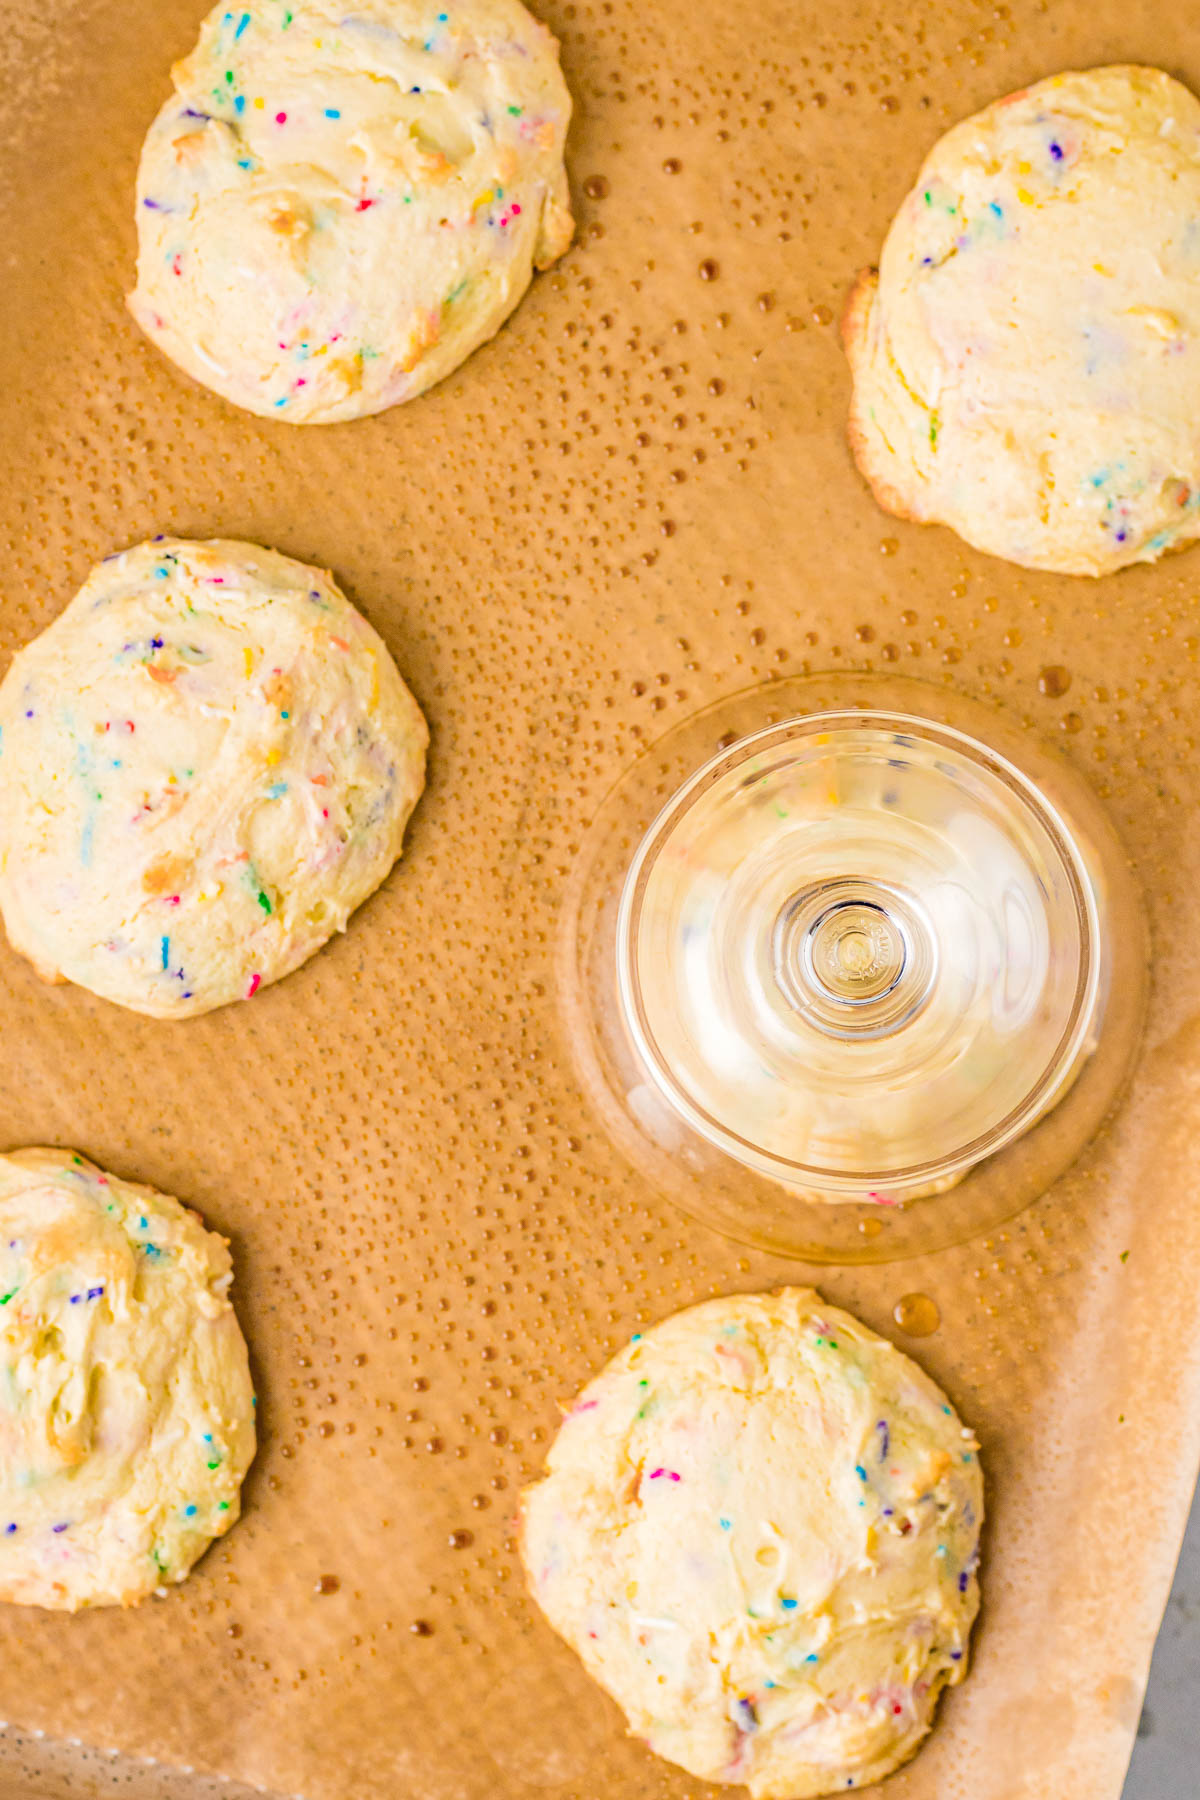 Confetti Cake Cookies (Crumbl Cookie Copycat Recipe) - Jumbo, super soft, slightly chewy cake mix cookies that are a PERFECT COPYCAT of the famous Crumbl Cookies! Loaded with rainbow and confetti sprinkles, and topped with vanilla cream cheese frosting, these are a dead ringer for the real thing!